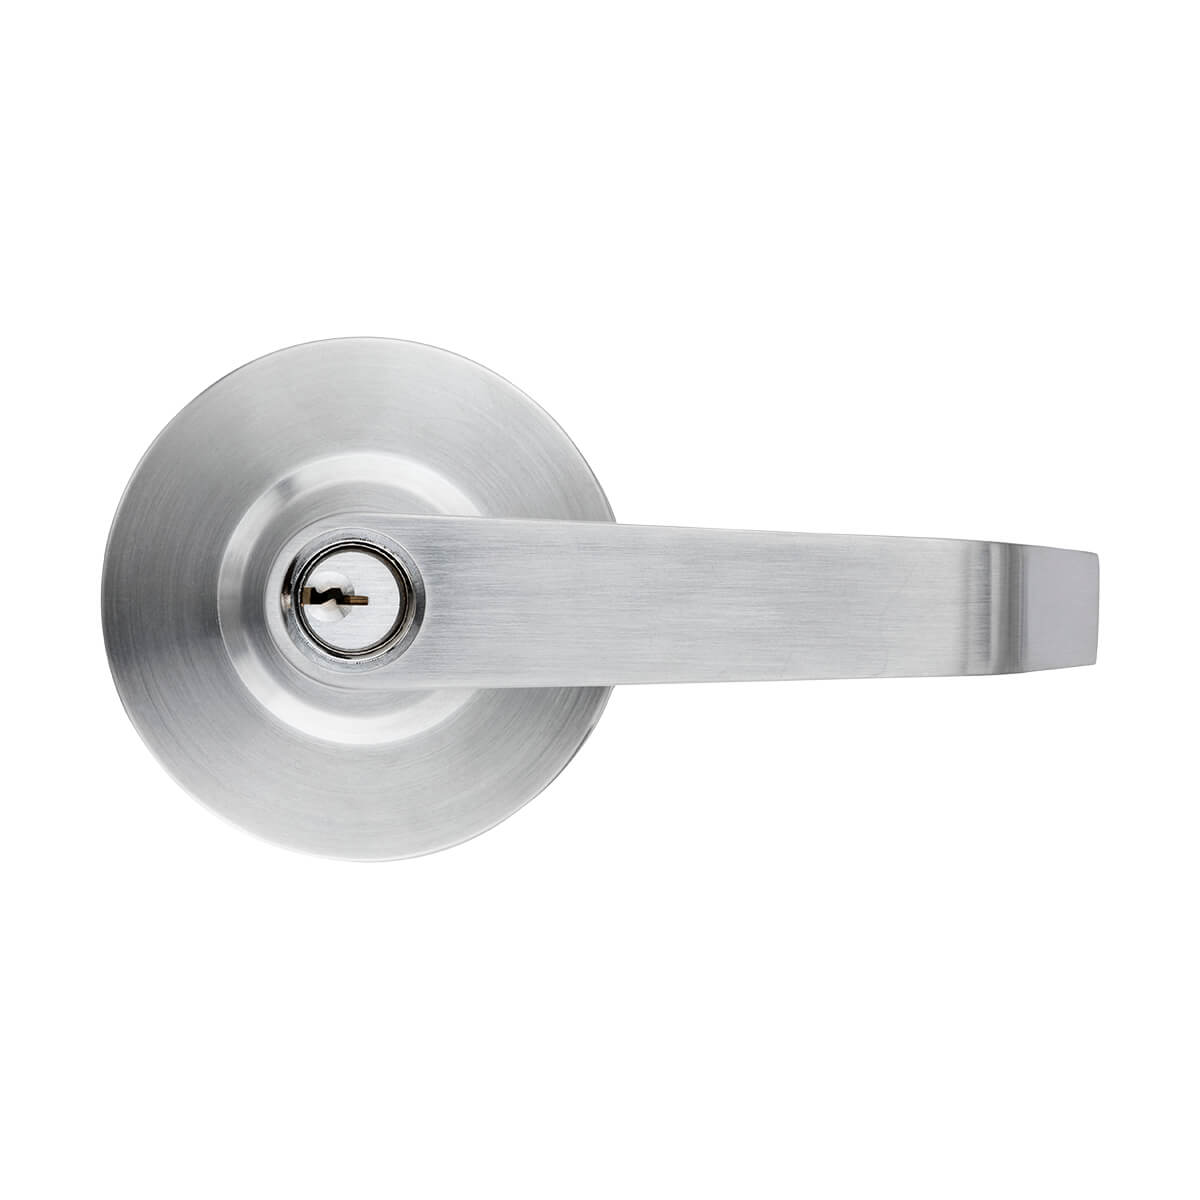 Tell Brushed Chrome Door Lever with Key - Adjustable Latch